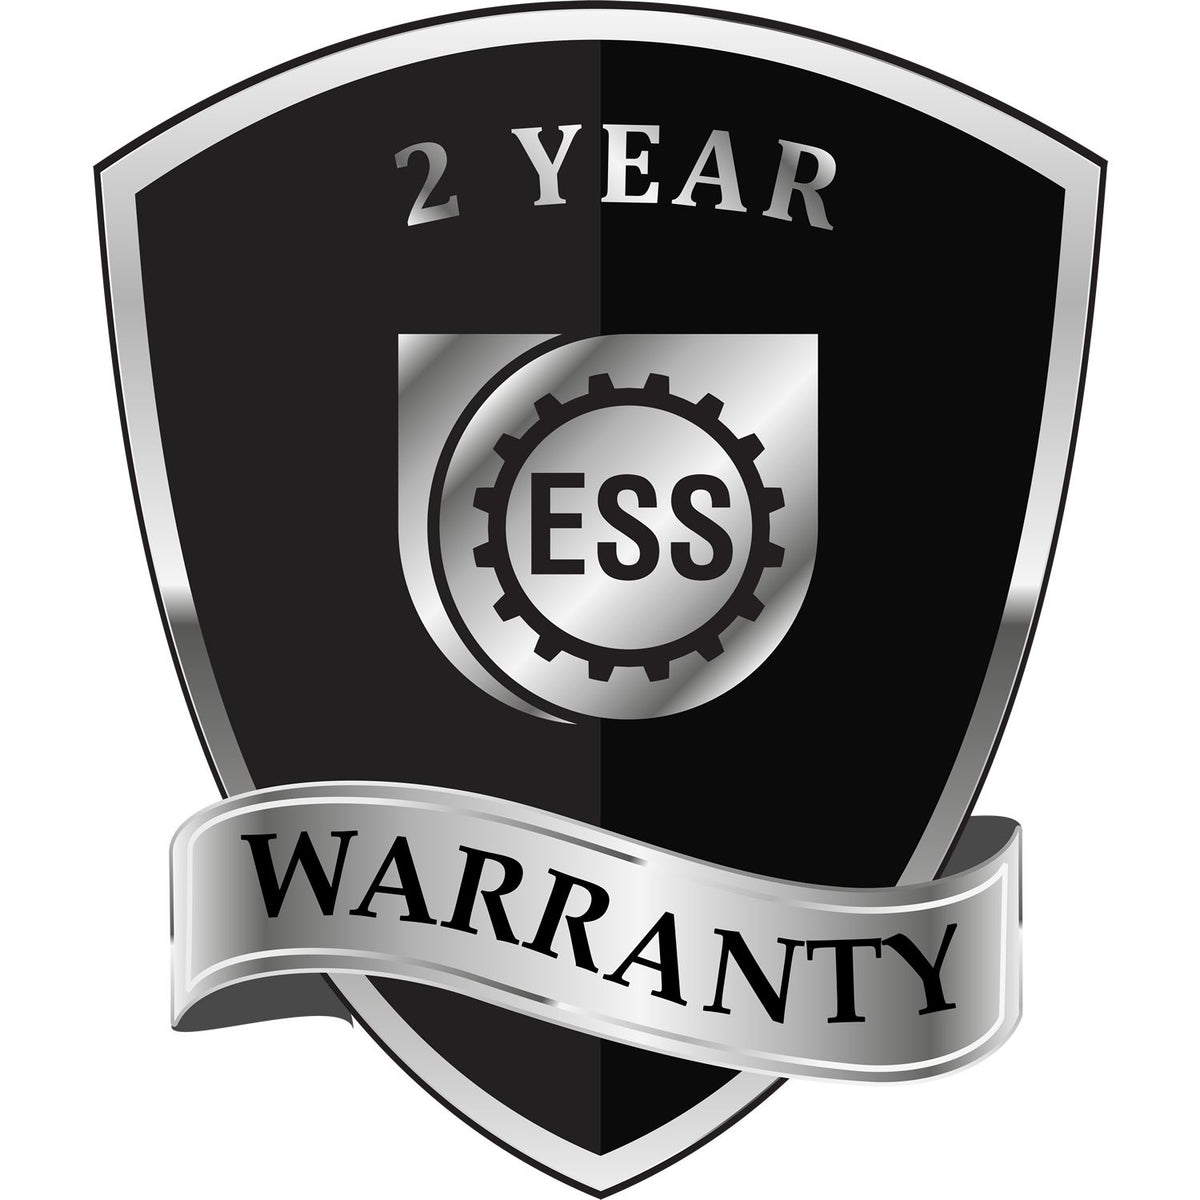 A badge or emblem showing a warranty icon for the State of Alaska Extended Long Reach Engineer Seal